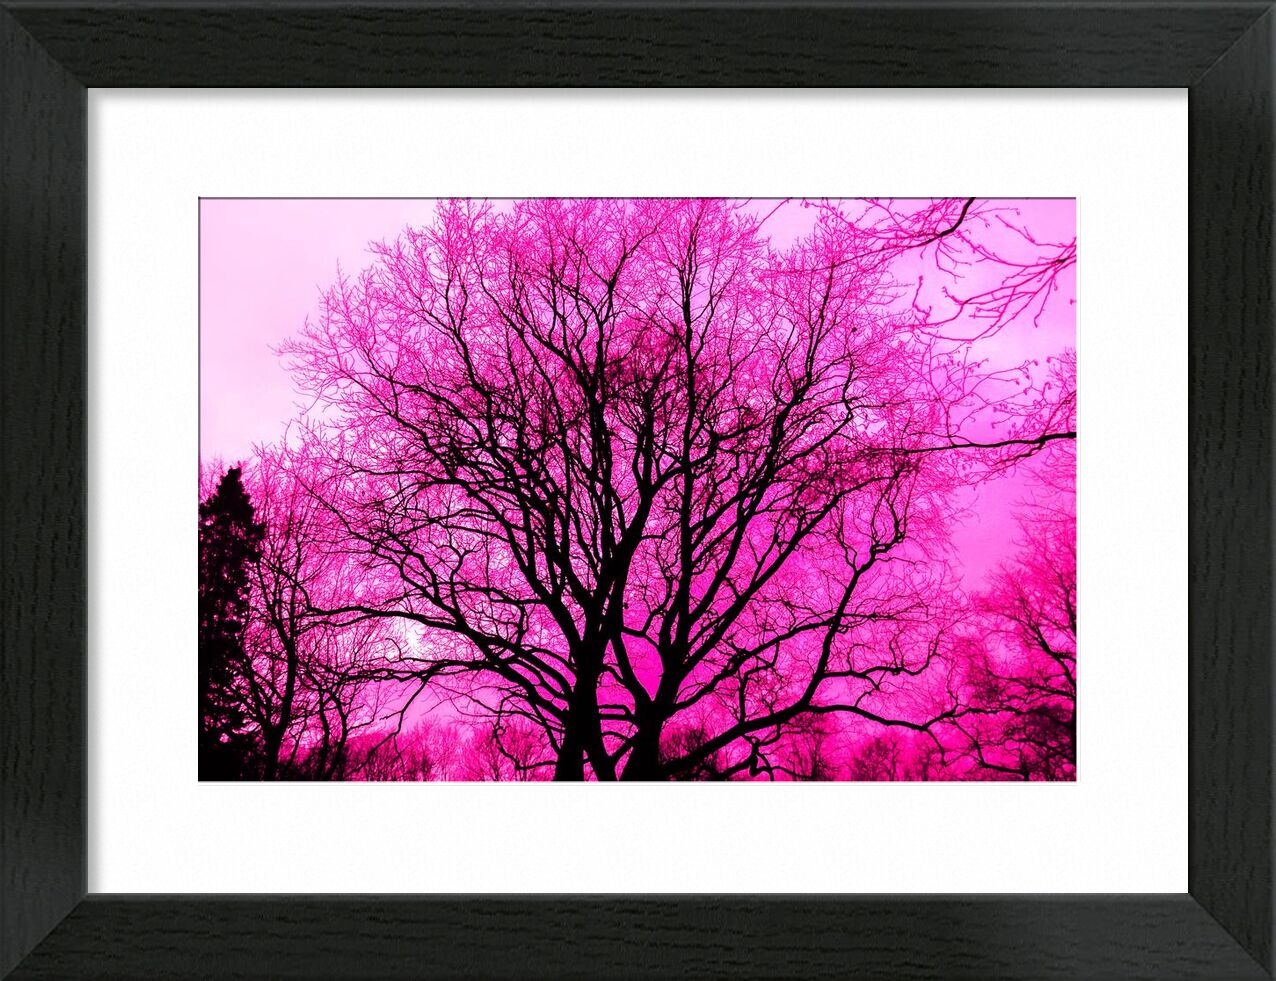 Life in pink from Aliss ART, Prodi Art, wallpaper, lone, wood, winter, purple, tree, Sun, silhouette, scenic, outdoors, nature, landscape, fog, fall, environment, dawn, dark, color, bright, branch, black, art, abstract